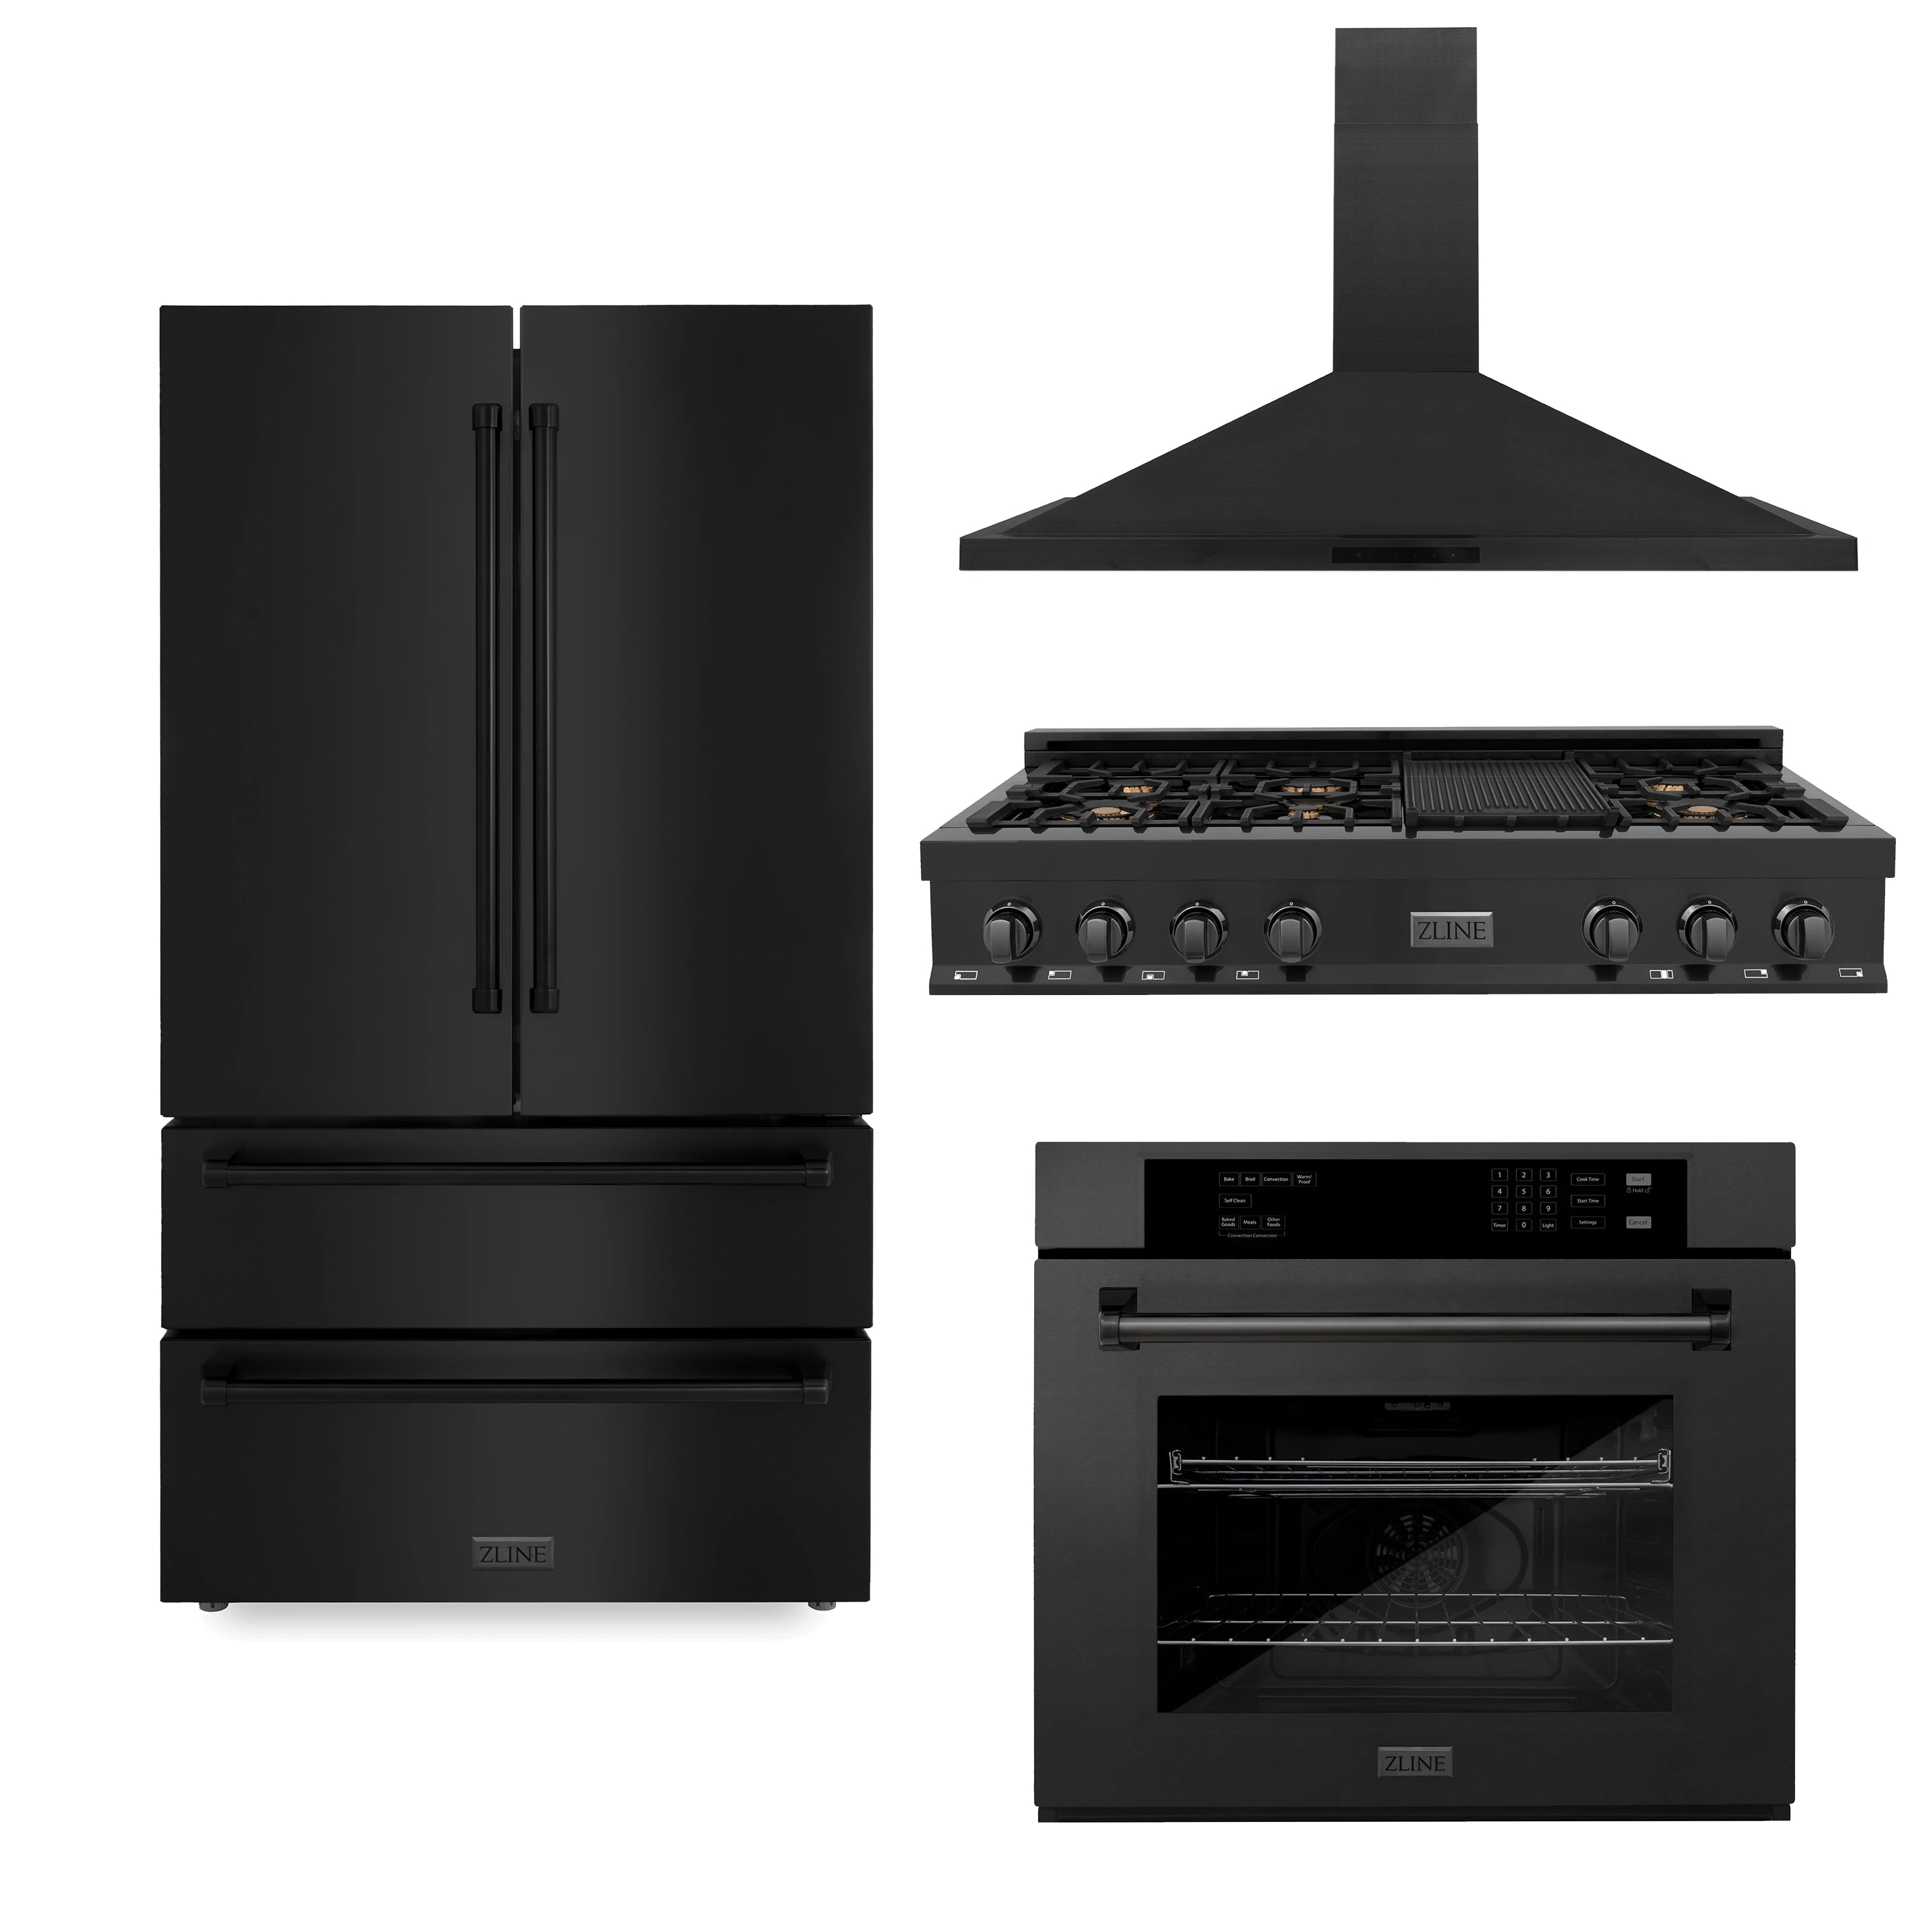 ZLINE 4-Piece Appliance Package - 48-Inch Rangetop with Brass Burners, Refrigerator, 30-Inch Electric Wall Oven, and Convertible Wall Mount Hood in Black Stainless Steel (4KPR-RTBRH48-AWS)